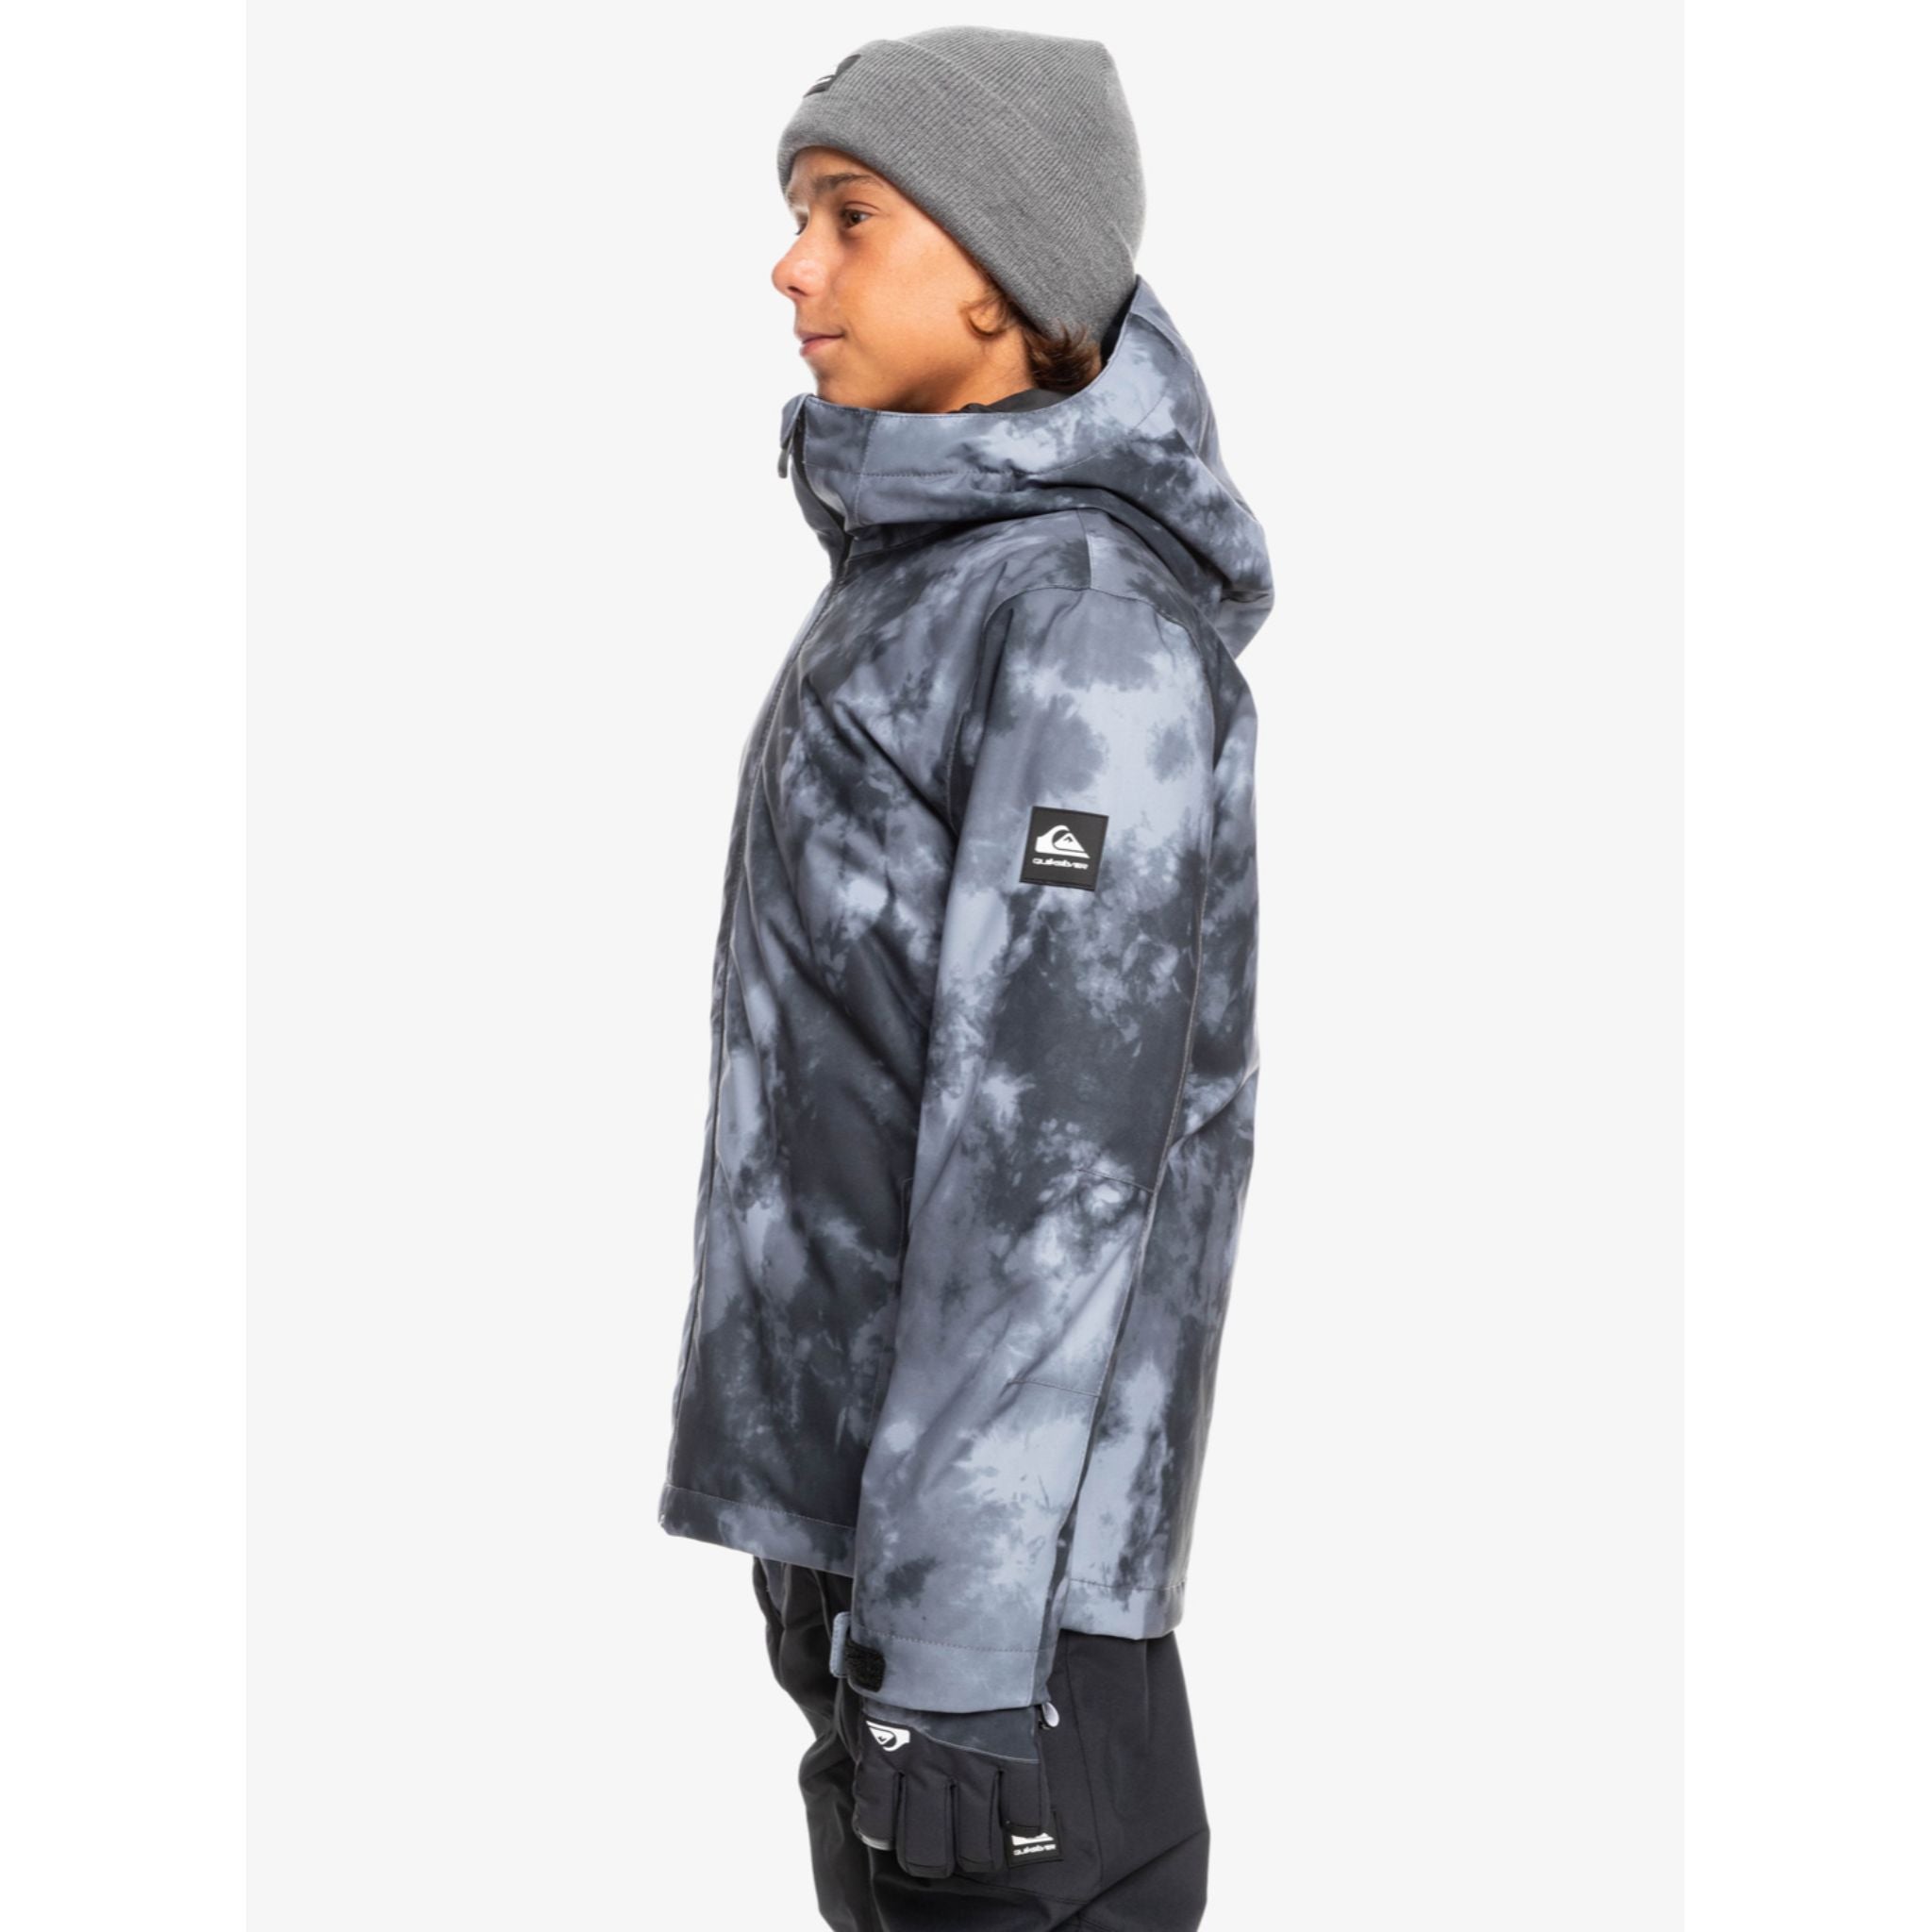 Quiksilver Boys Mission Printed Youth Jacket